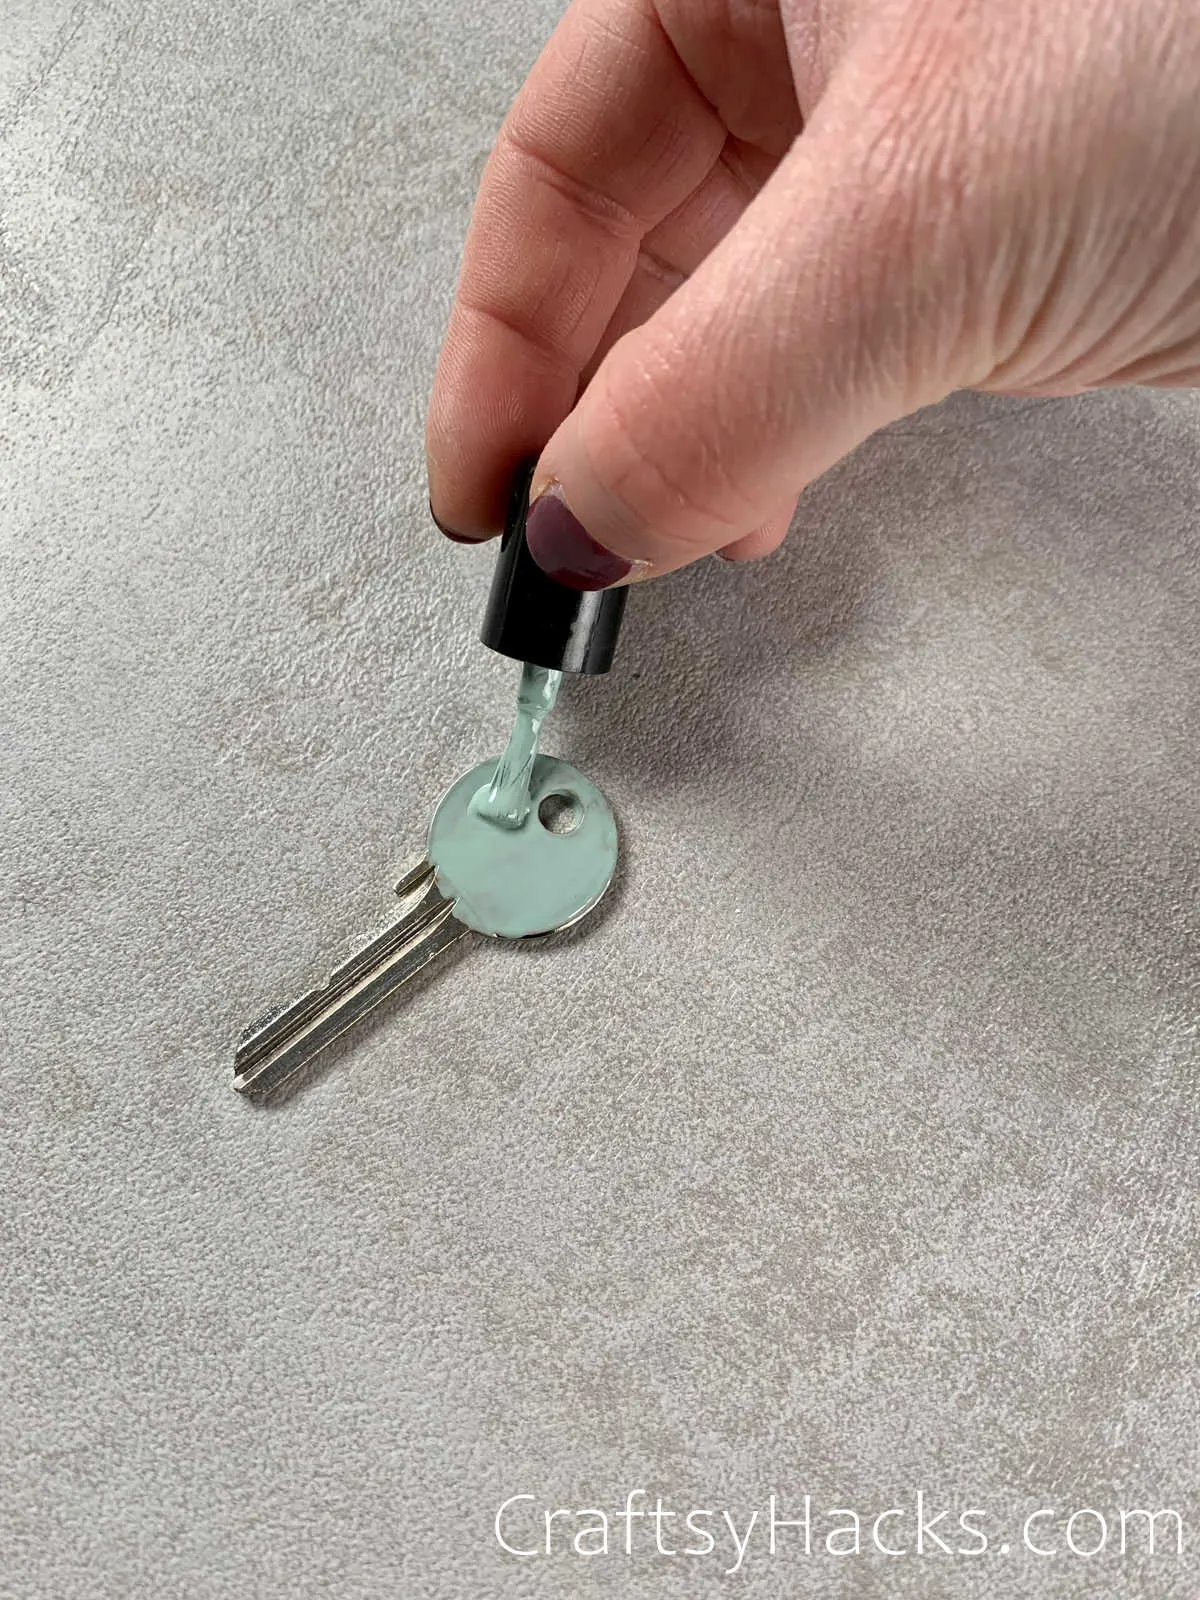 differentiate keys with nail polish